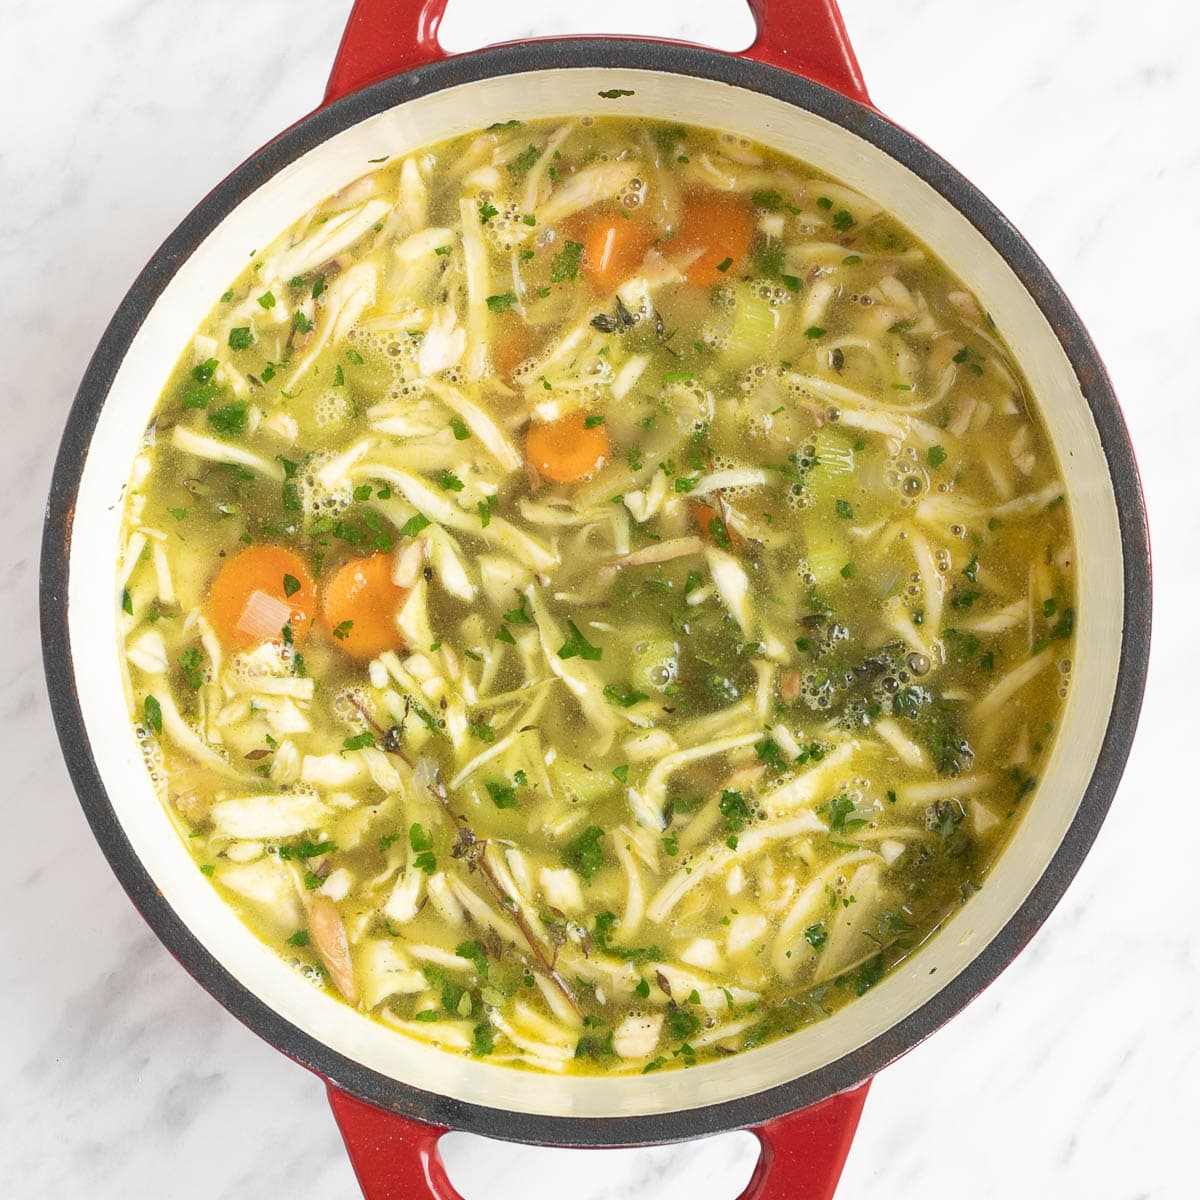 A red-white enameled Dutch oven with chopped veggies like carrot, celery, and onion, shredded mushroom pieces, green herbs in vegetable broth.